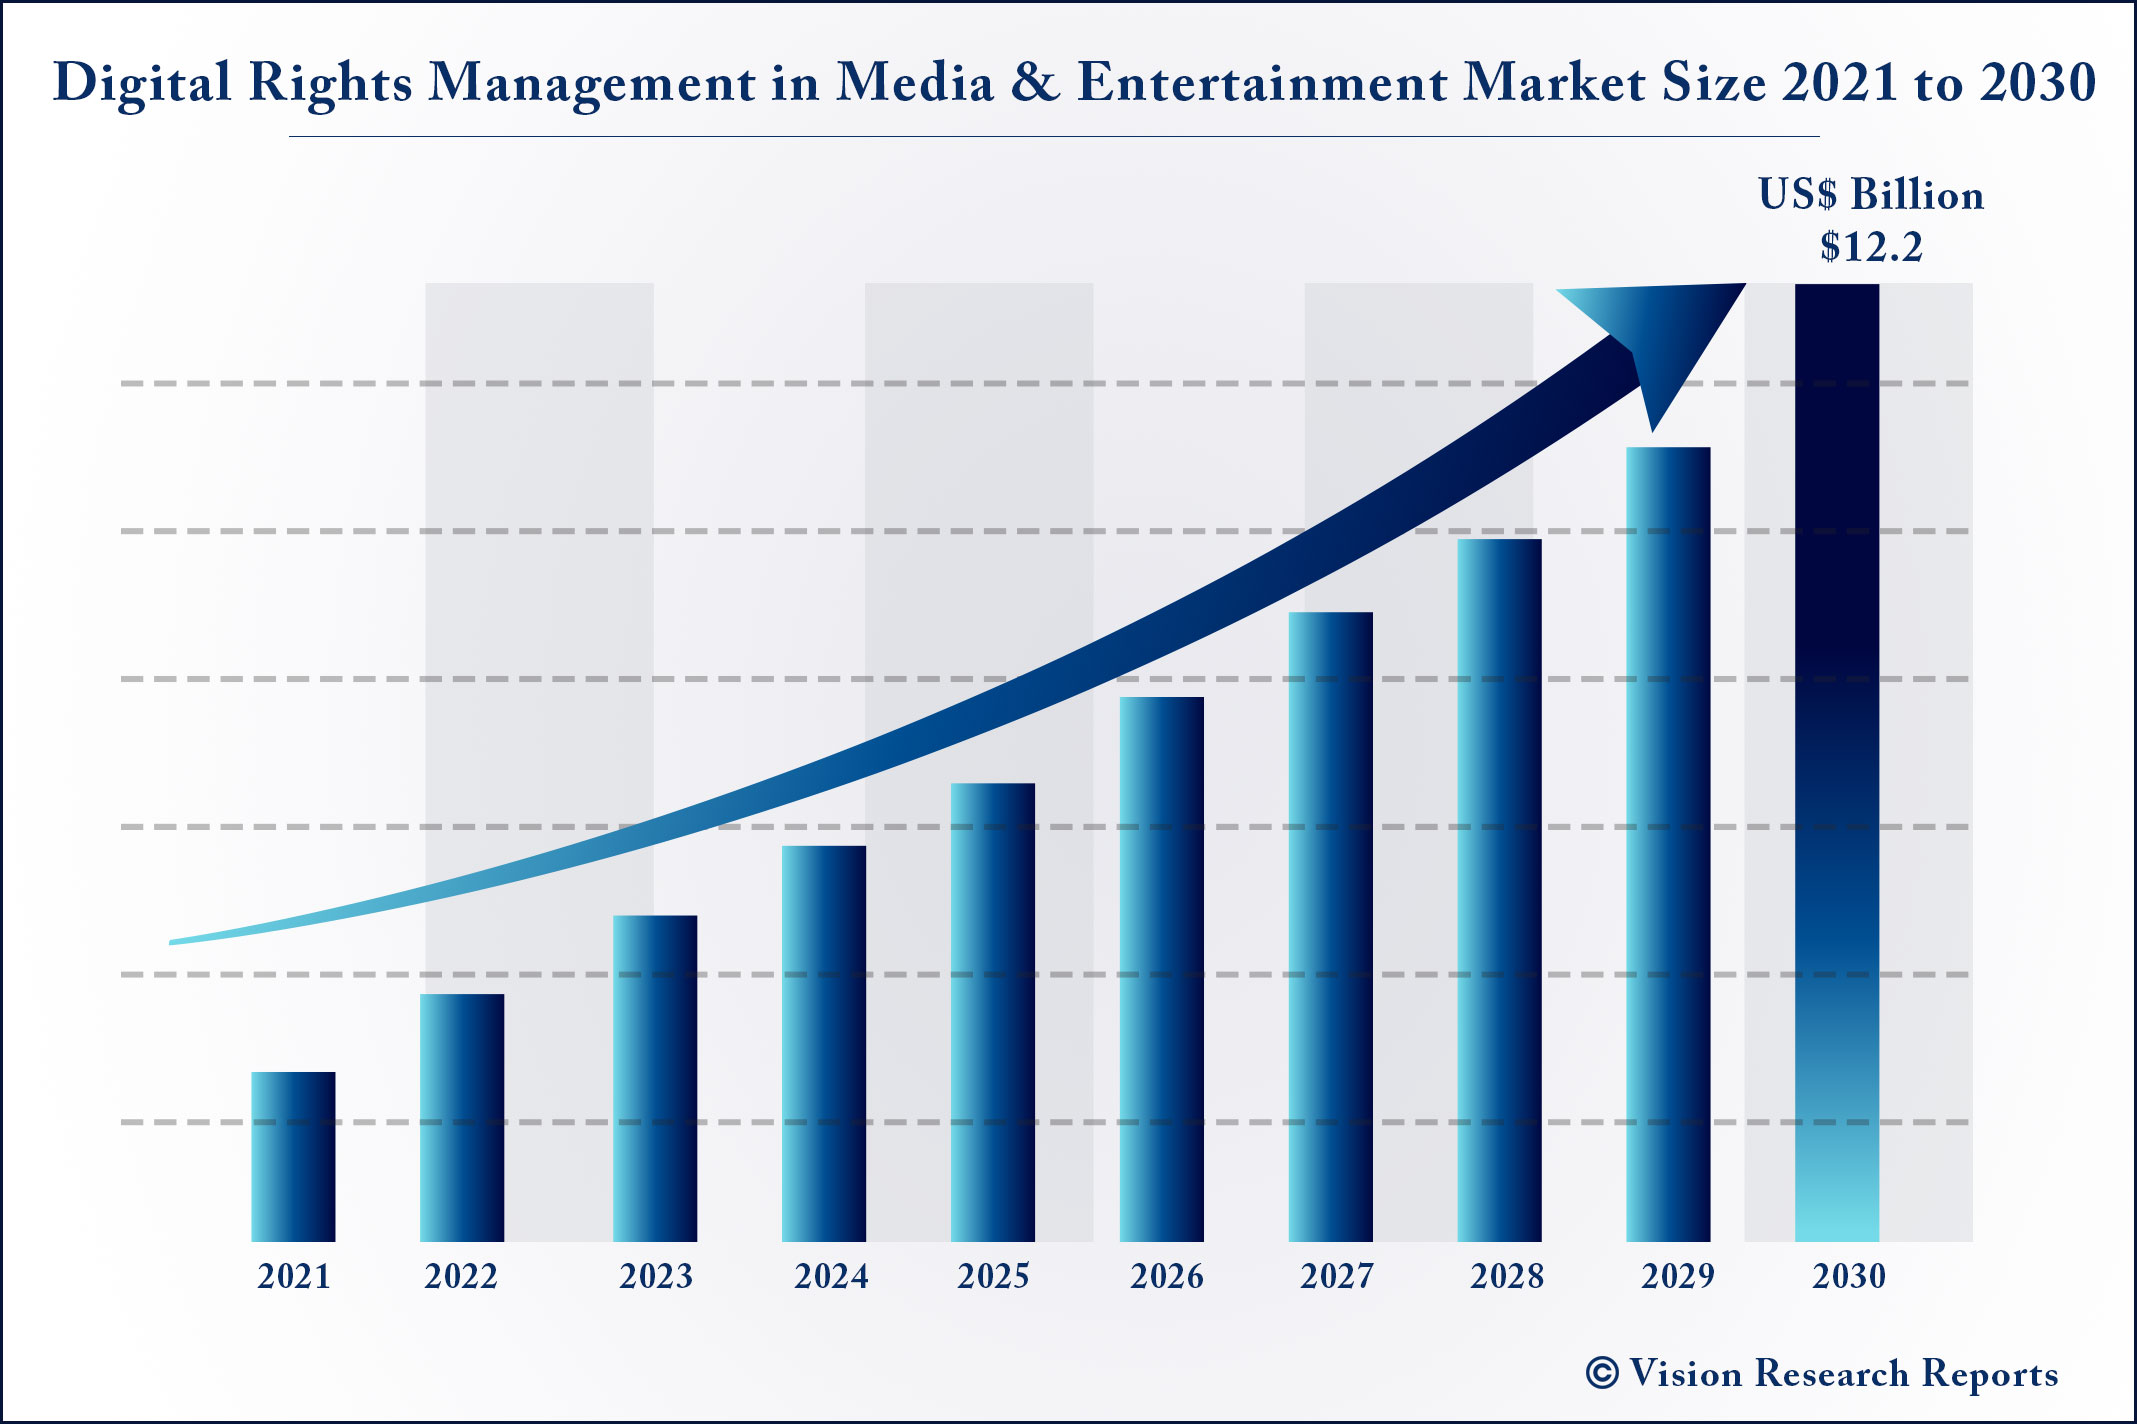 Digital Rights Management in Media & Entertainment Market Size 2021 to 2030